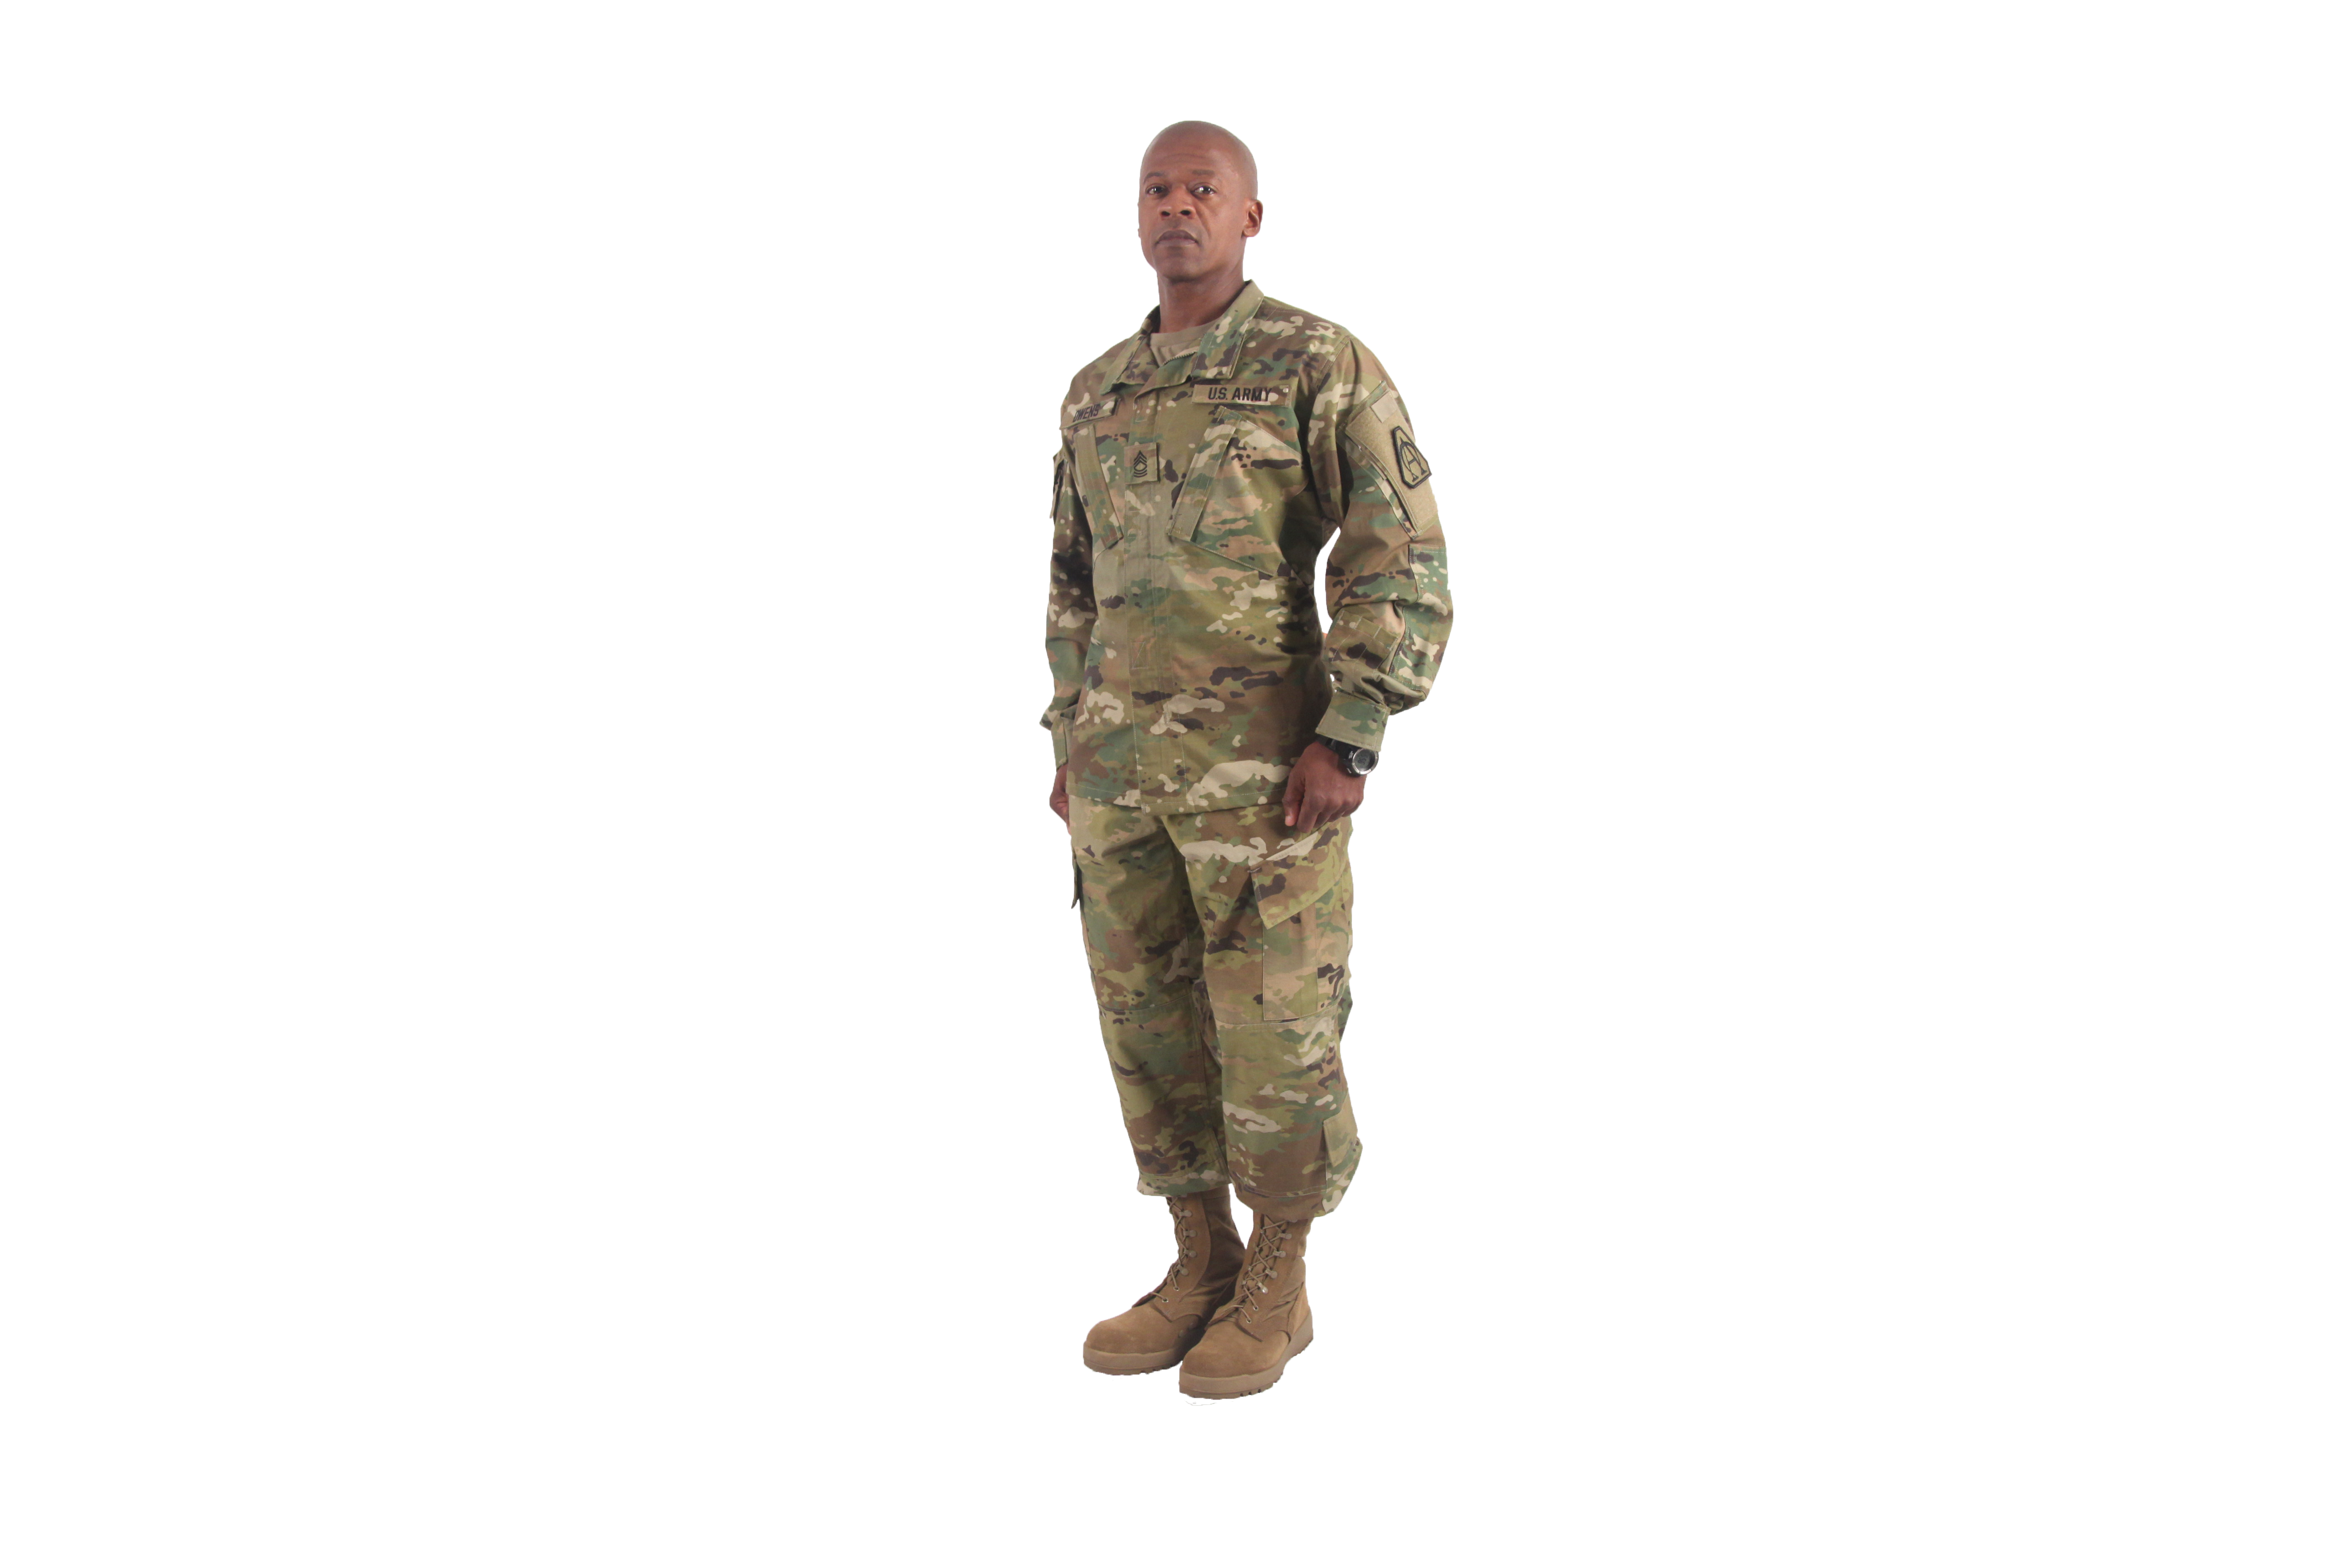  Army  to field Operational Camouflage  pattern  for uniforms 